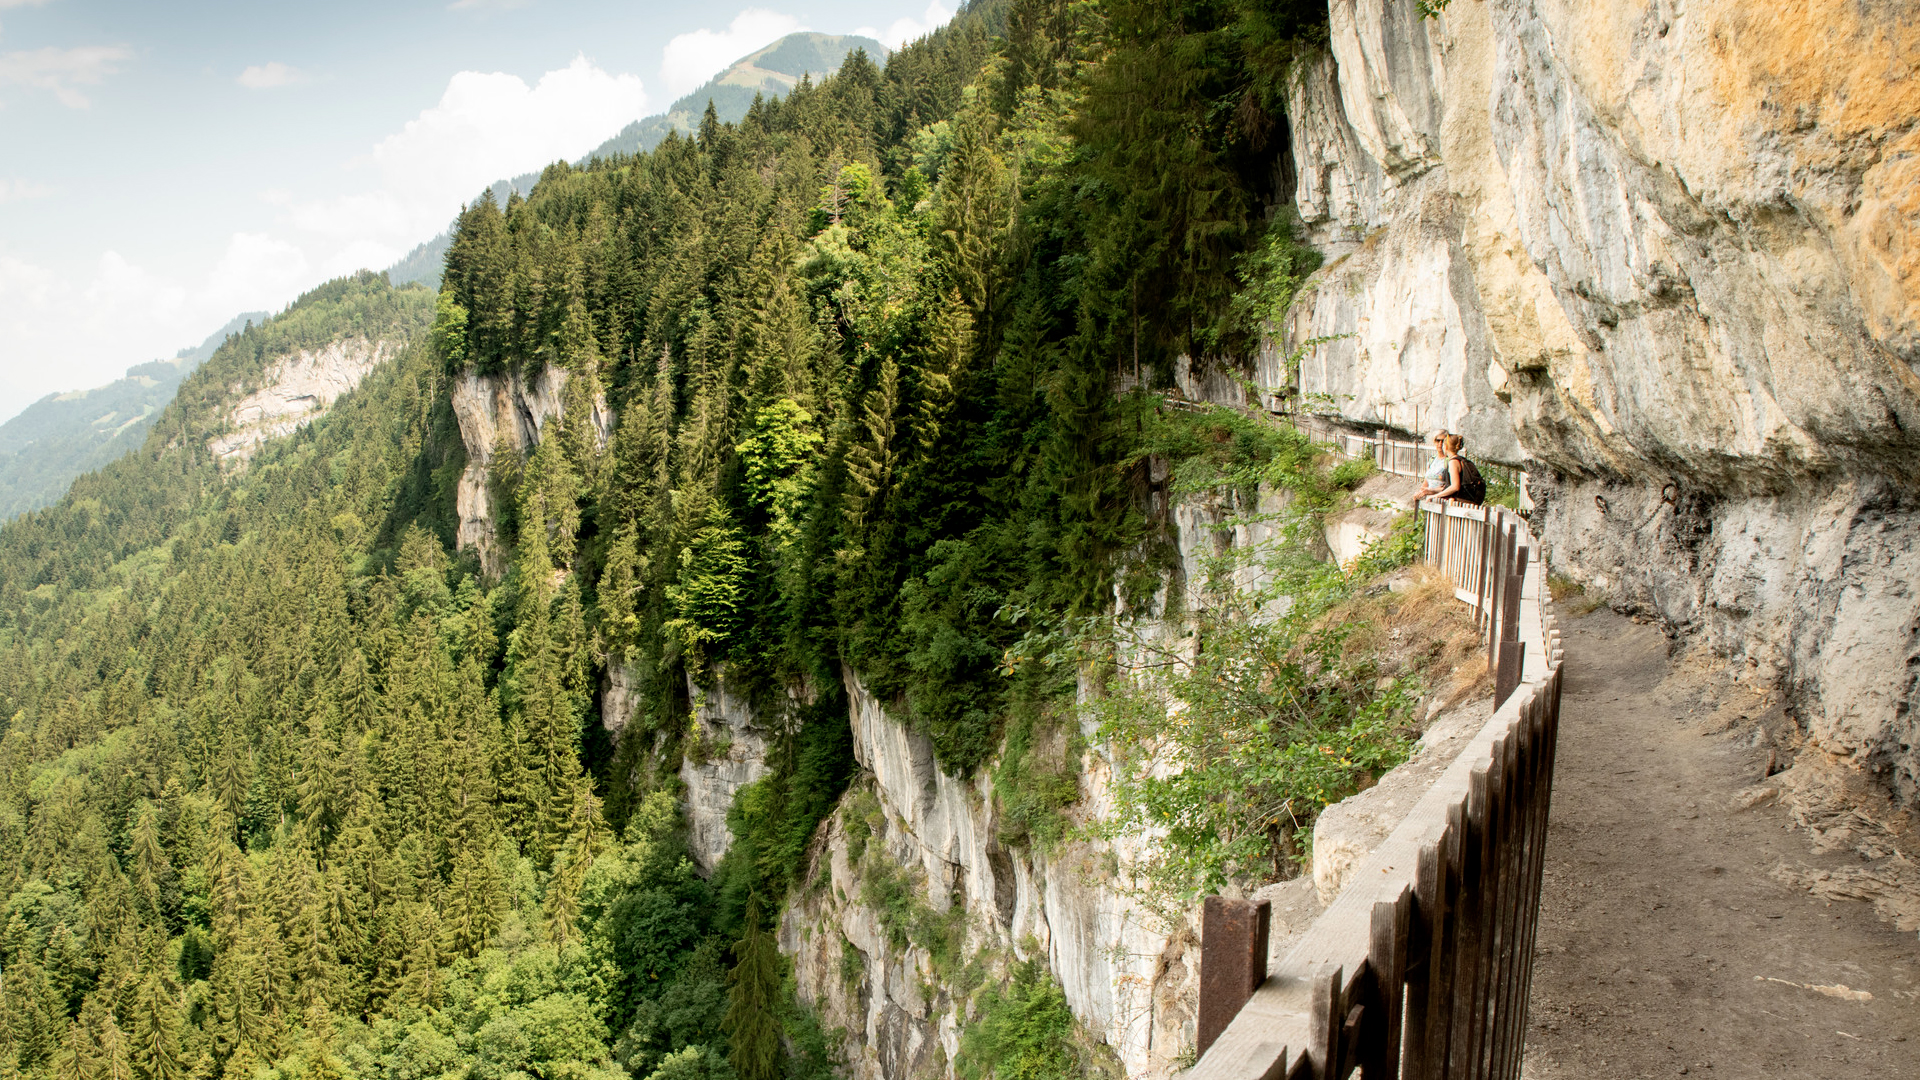 The Gallery Défago is a highly scenic yet accessible path carved into a sheer cliff.